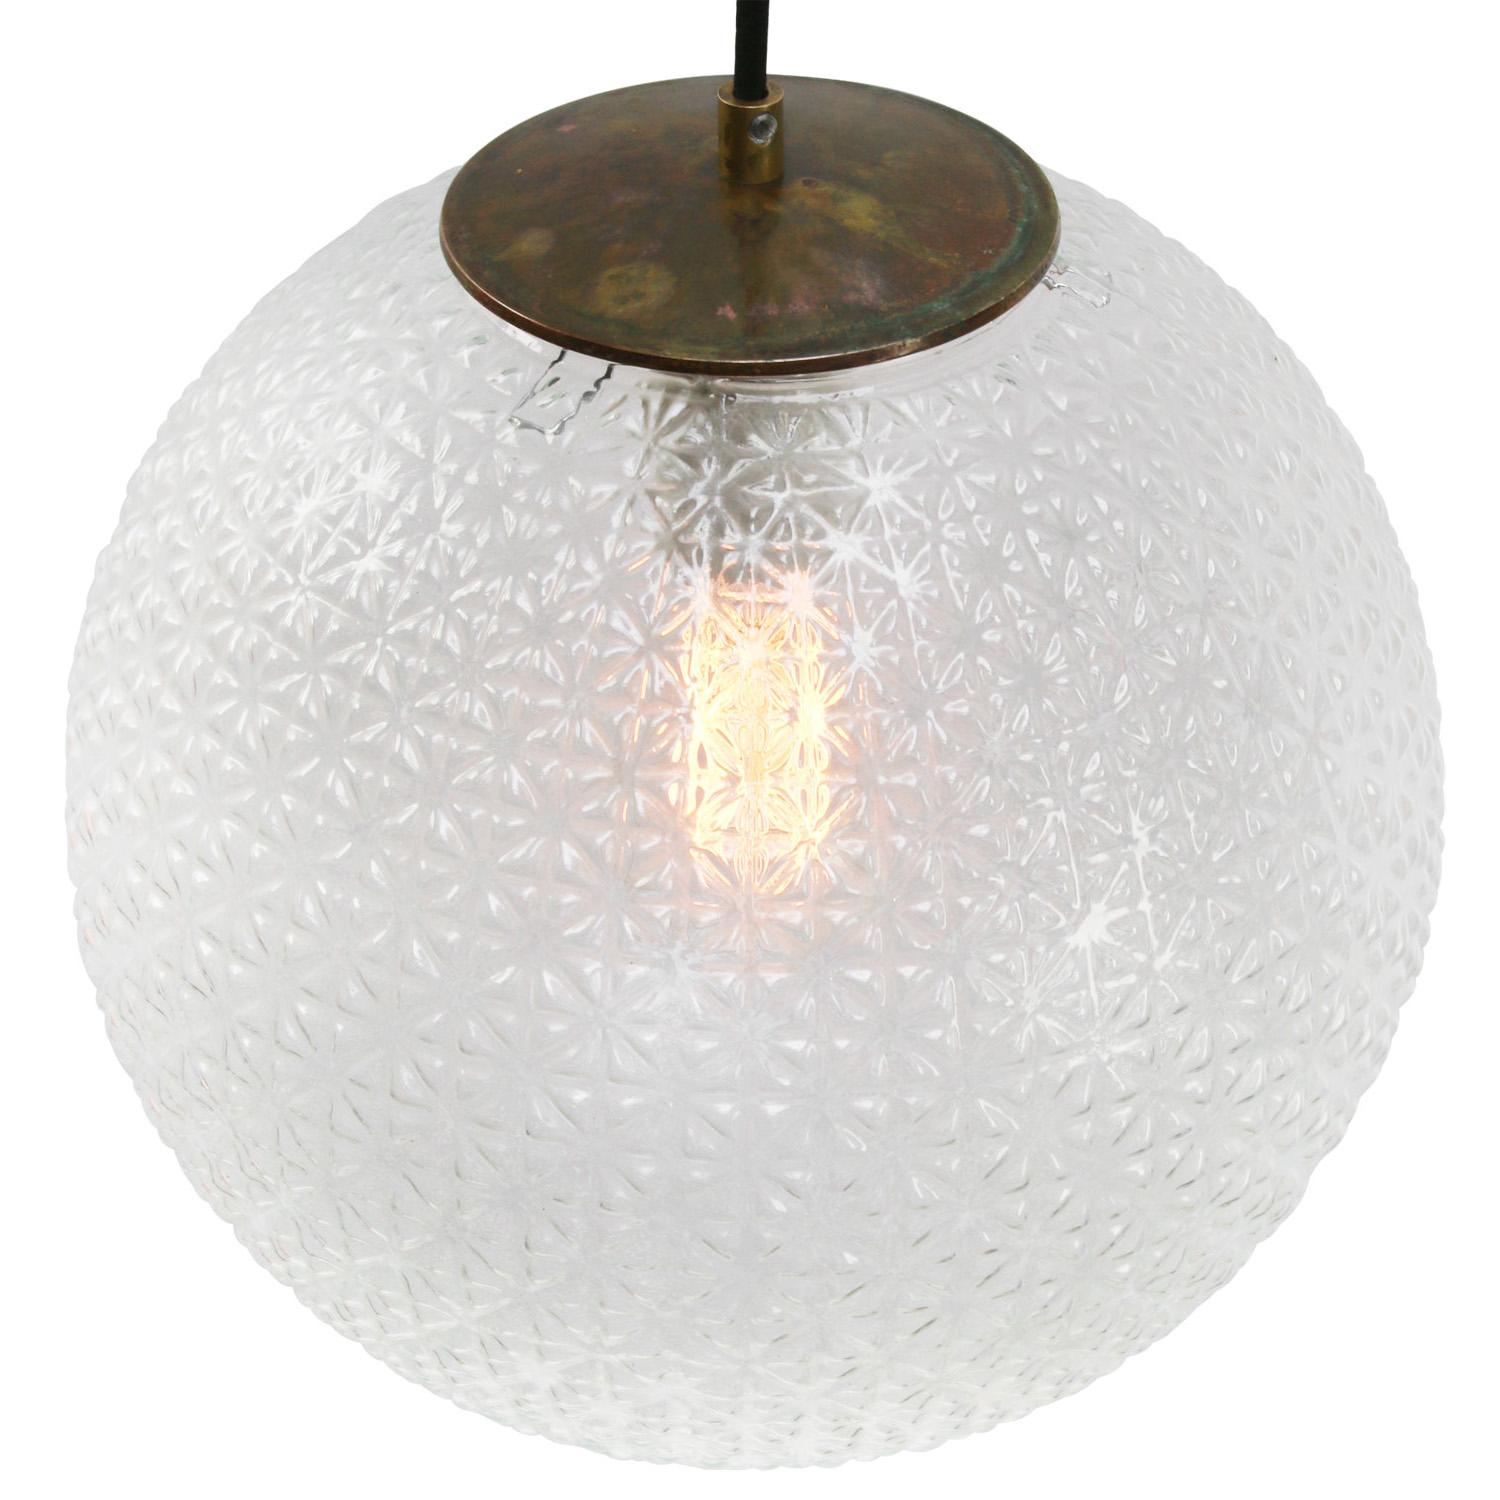 Clear texture glass pendant.

Weight: 2.80 kg / 6.2 lb

Priced per individual item. All lamps have been made suitable by international standards for incandescent light bulbs, energy-efficient and LED bulbs. E26/E27 bulb holders and new 110 volt